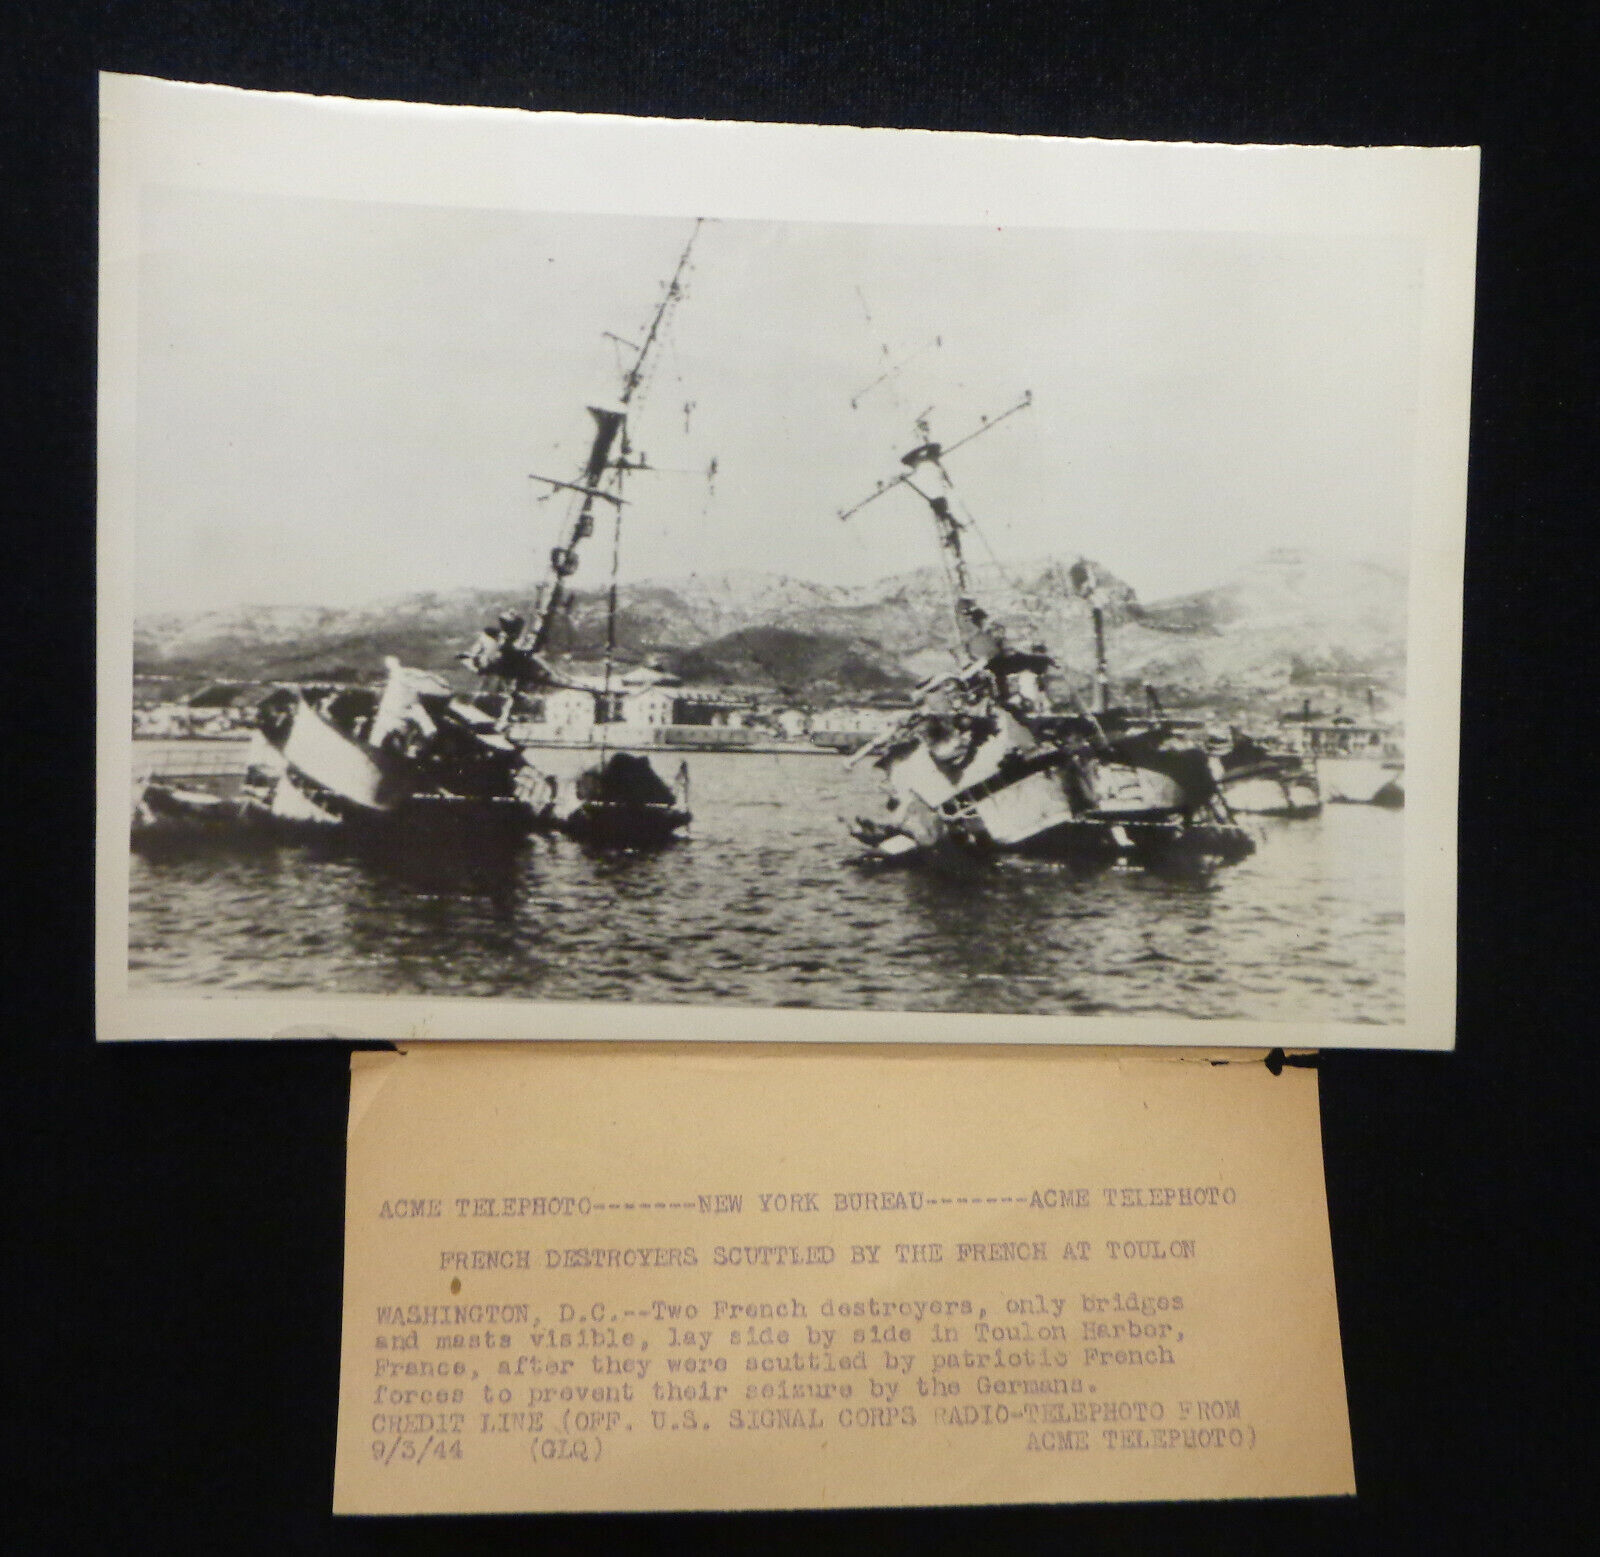 WW2 Original ACME Telephoto French Destroyers Scuttled at Toulon 6 x 9 Photo